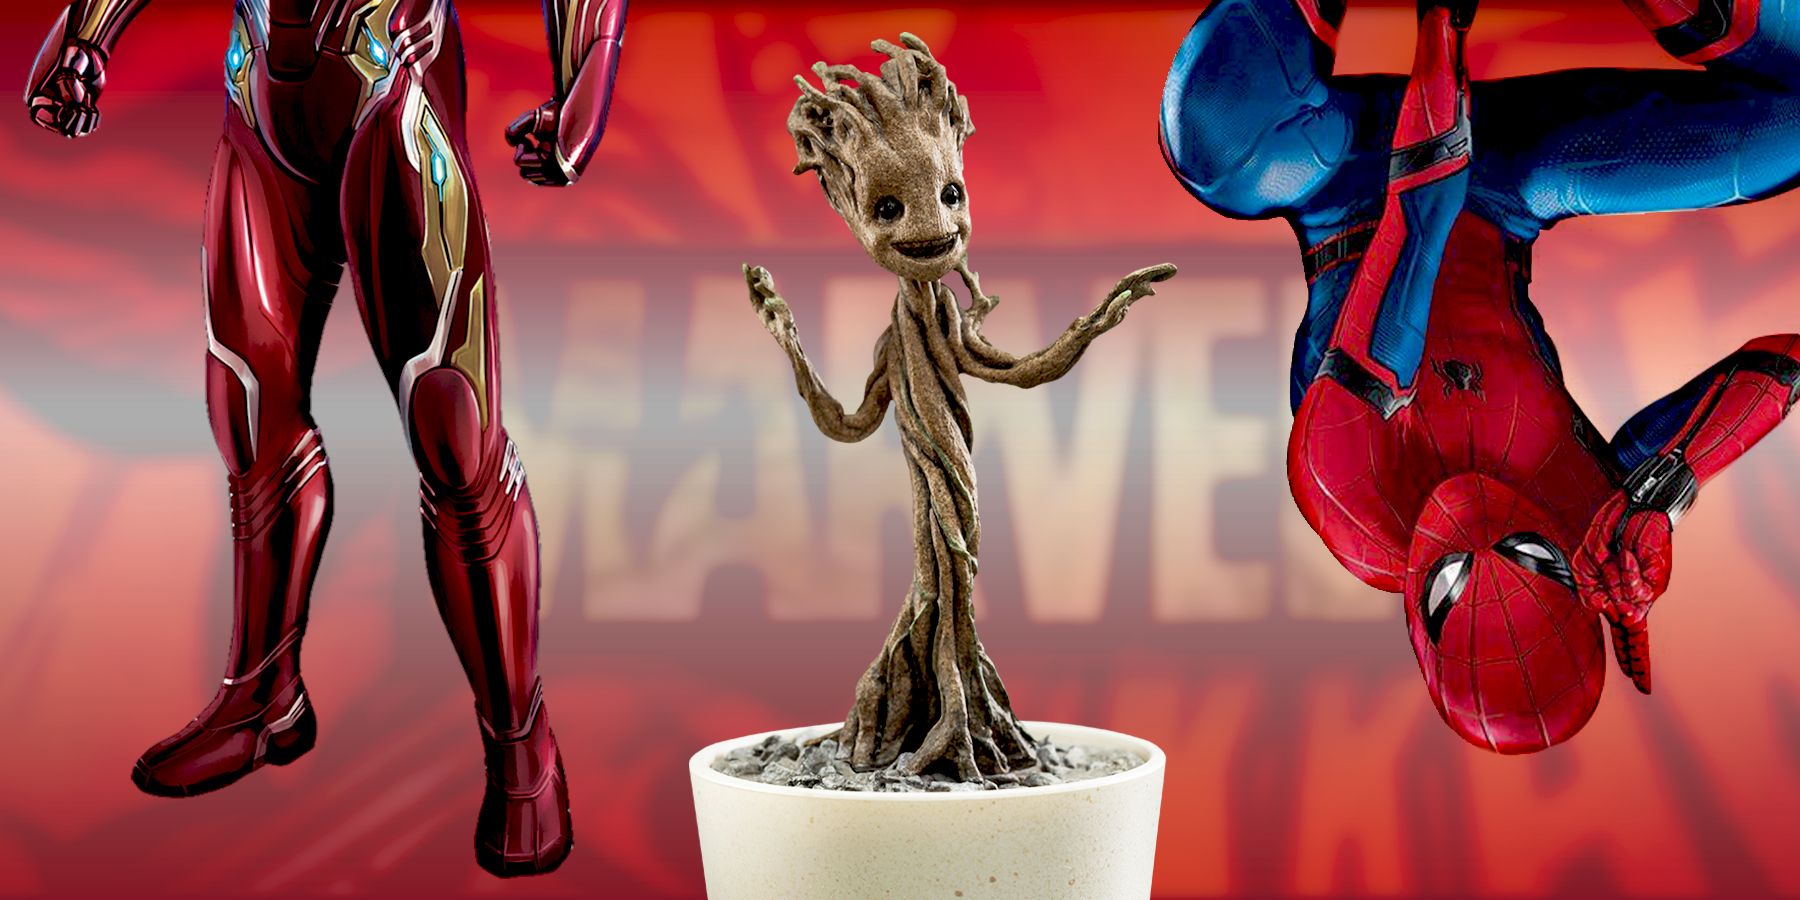 Baby Groot is between the bottom half of Iron Man's suit, and Spider-Man dangling upside-down